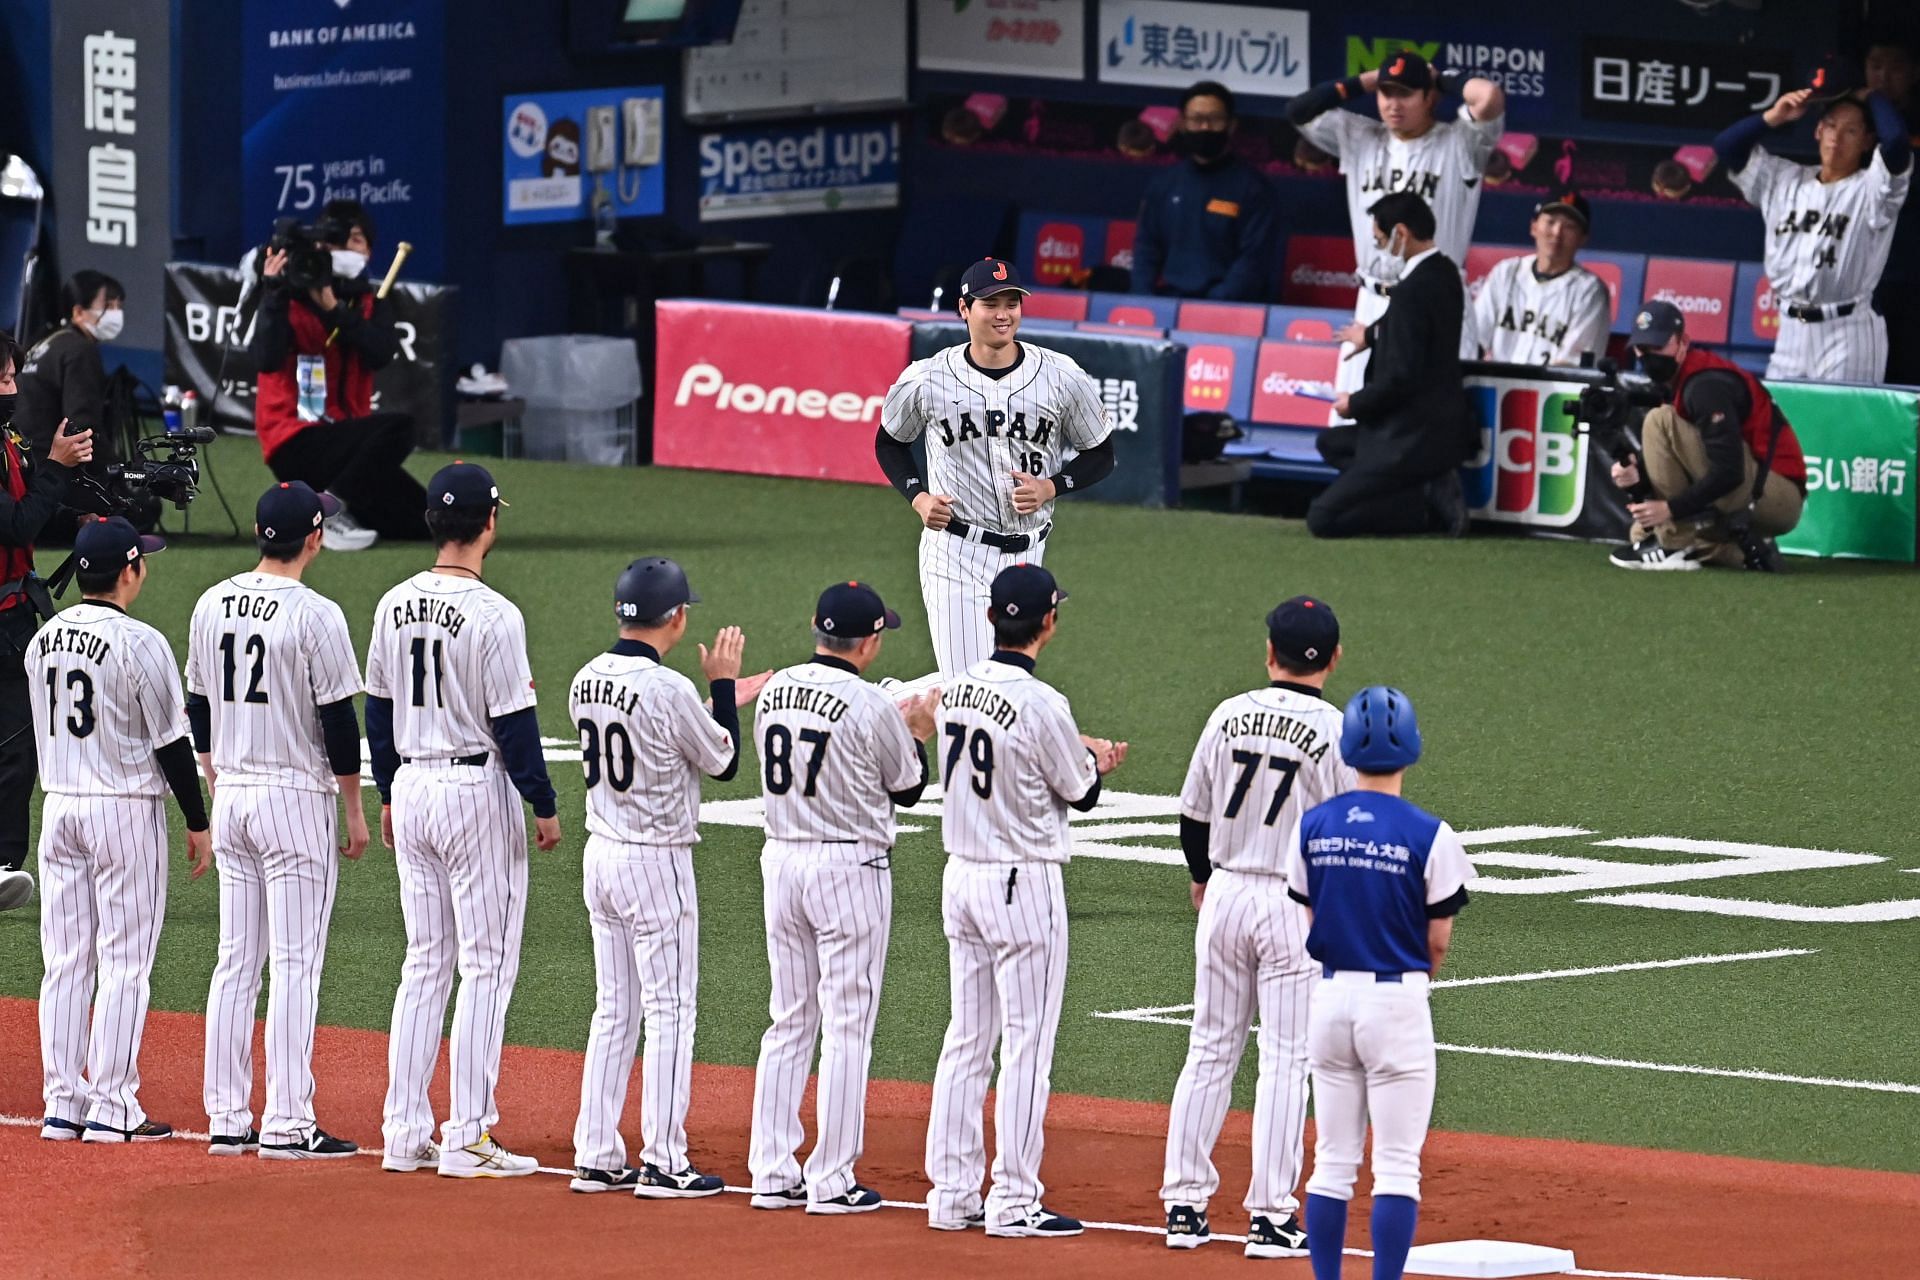 What's Japan's Pepper-Grinder Celebration That Shohei Ohtani Did